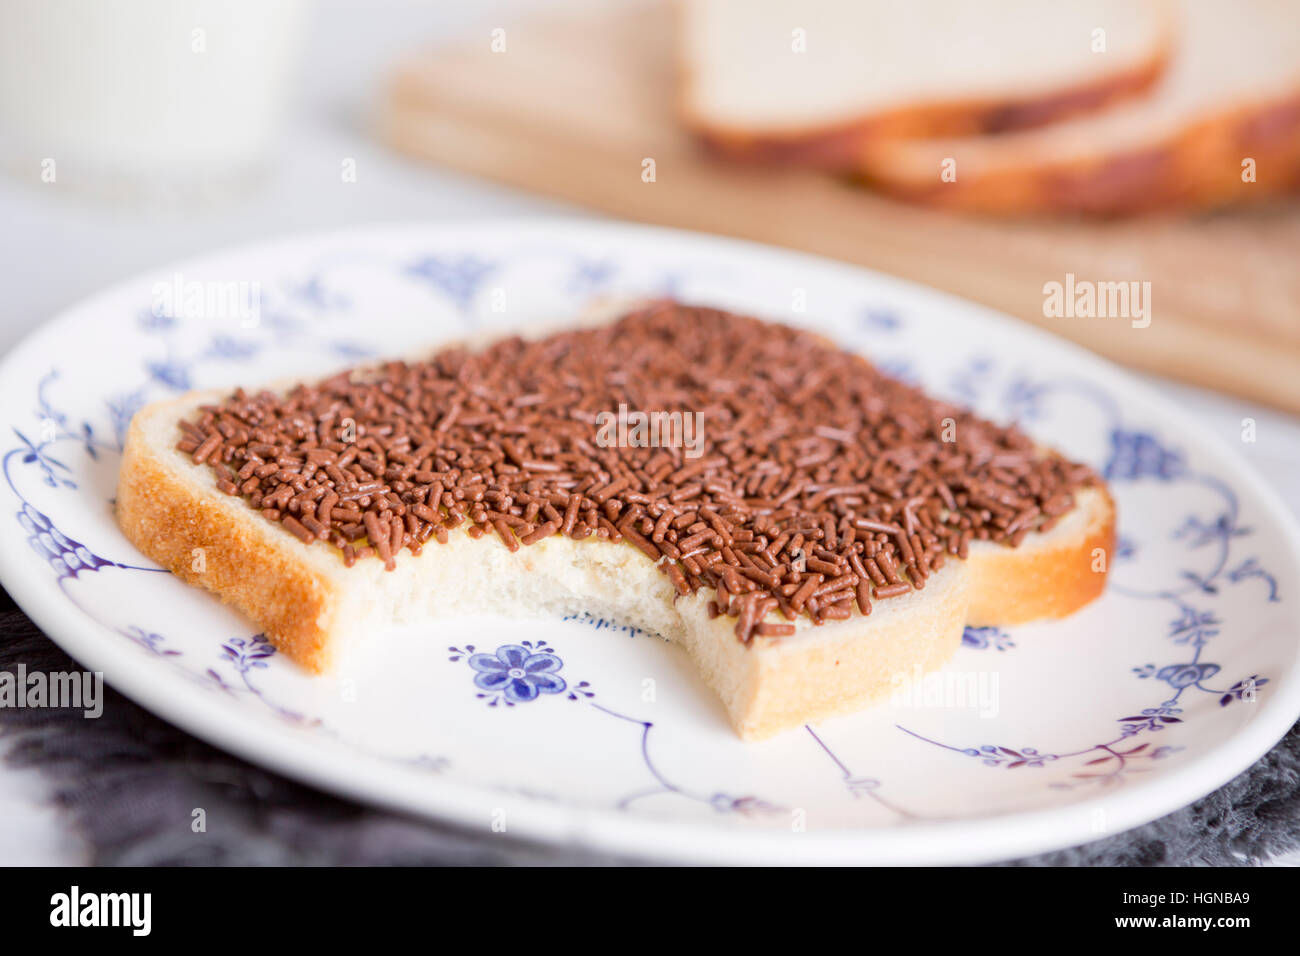 A sandwich with chocolate sprinkles or a 'boterham met hagelslag', Dutch traditional food. Stock Photo